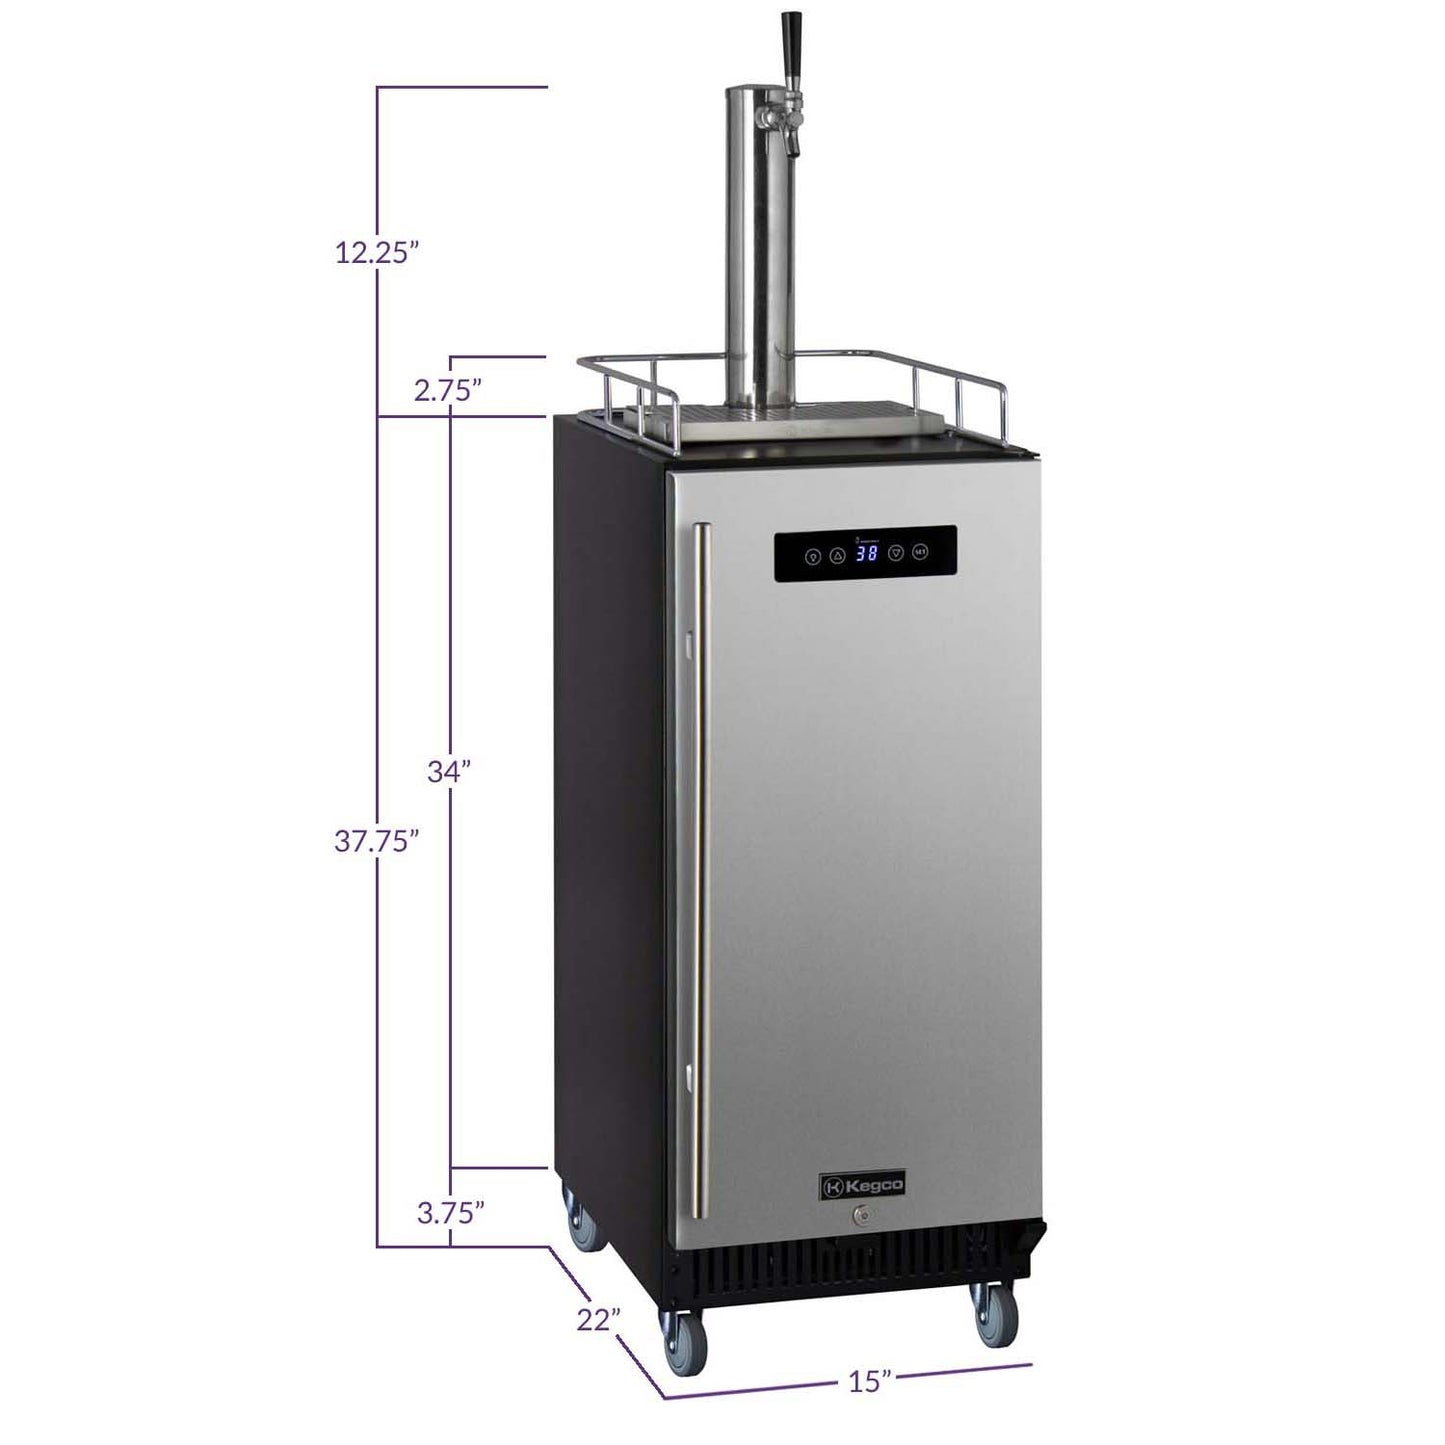 Kegco 15" Wide Single Tap Stainless Steel Kegerator | Commercial Approved